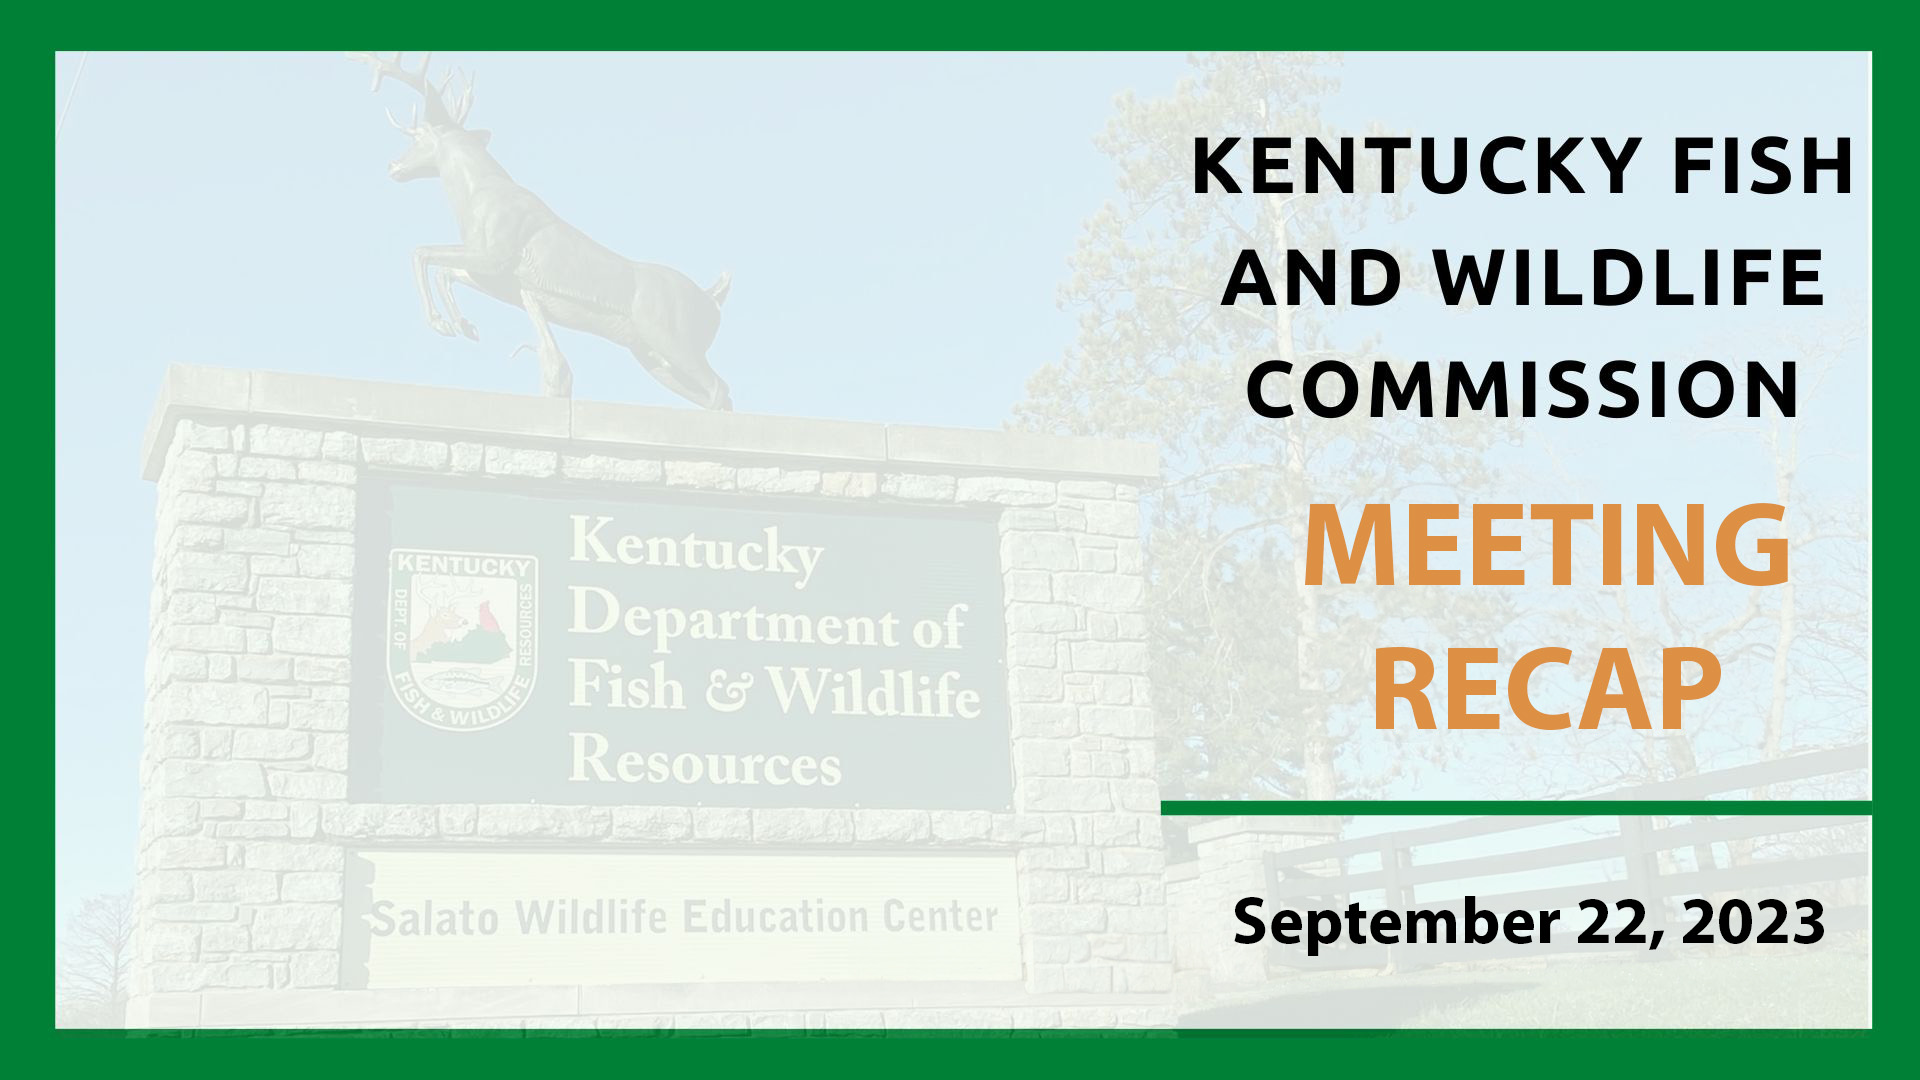 Kentucky Fish and Wildlife Commission proposes regulation changes